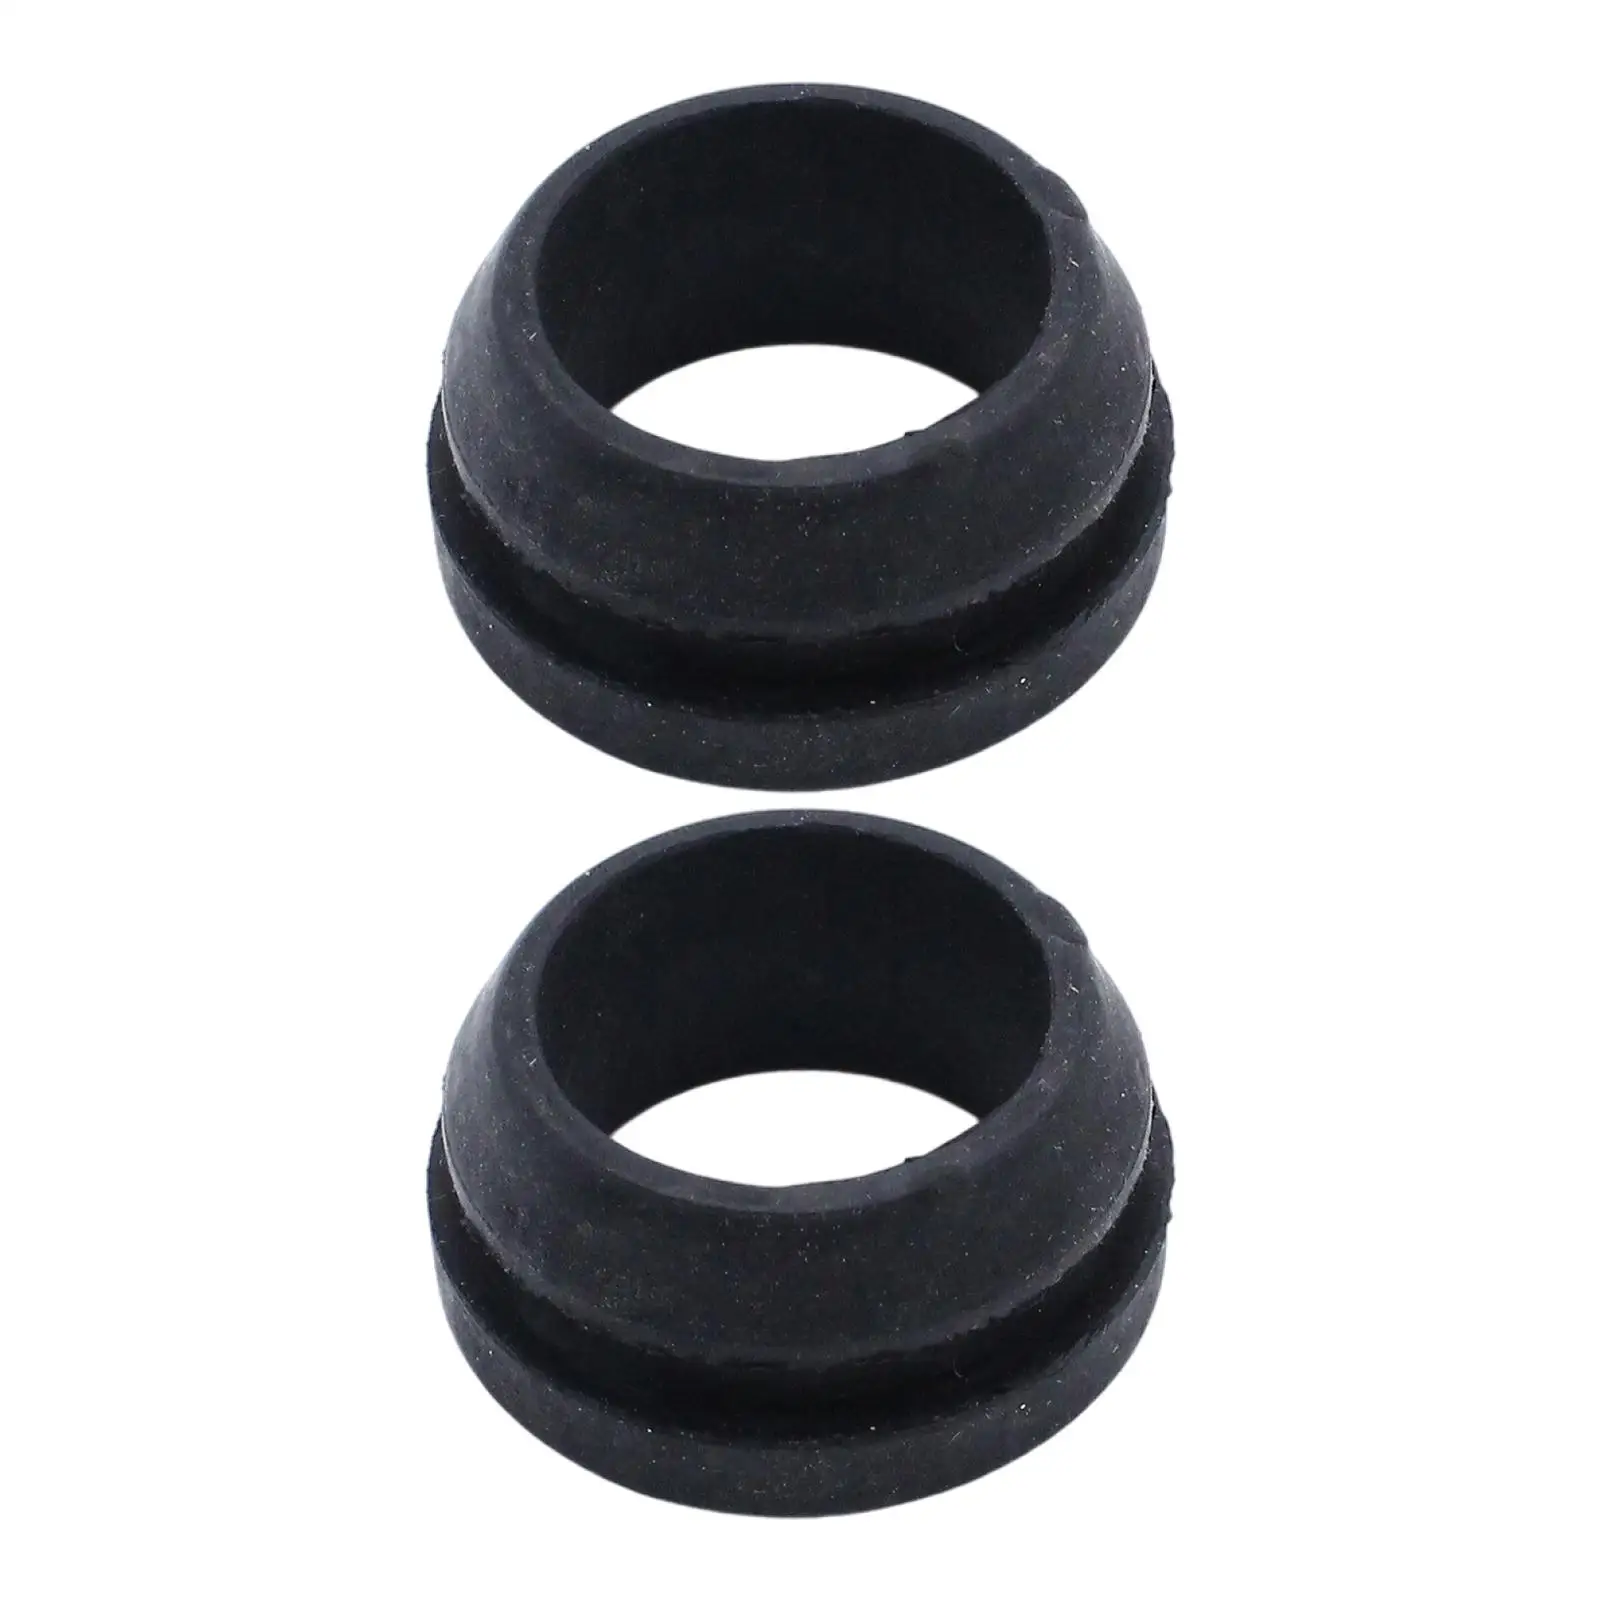 2x High Temp Rubber Breather Grommets Fit for Metal Cover 4880/4998 1/4